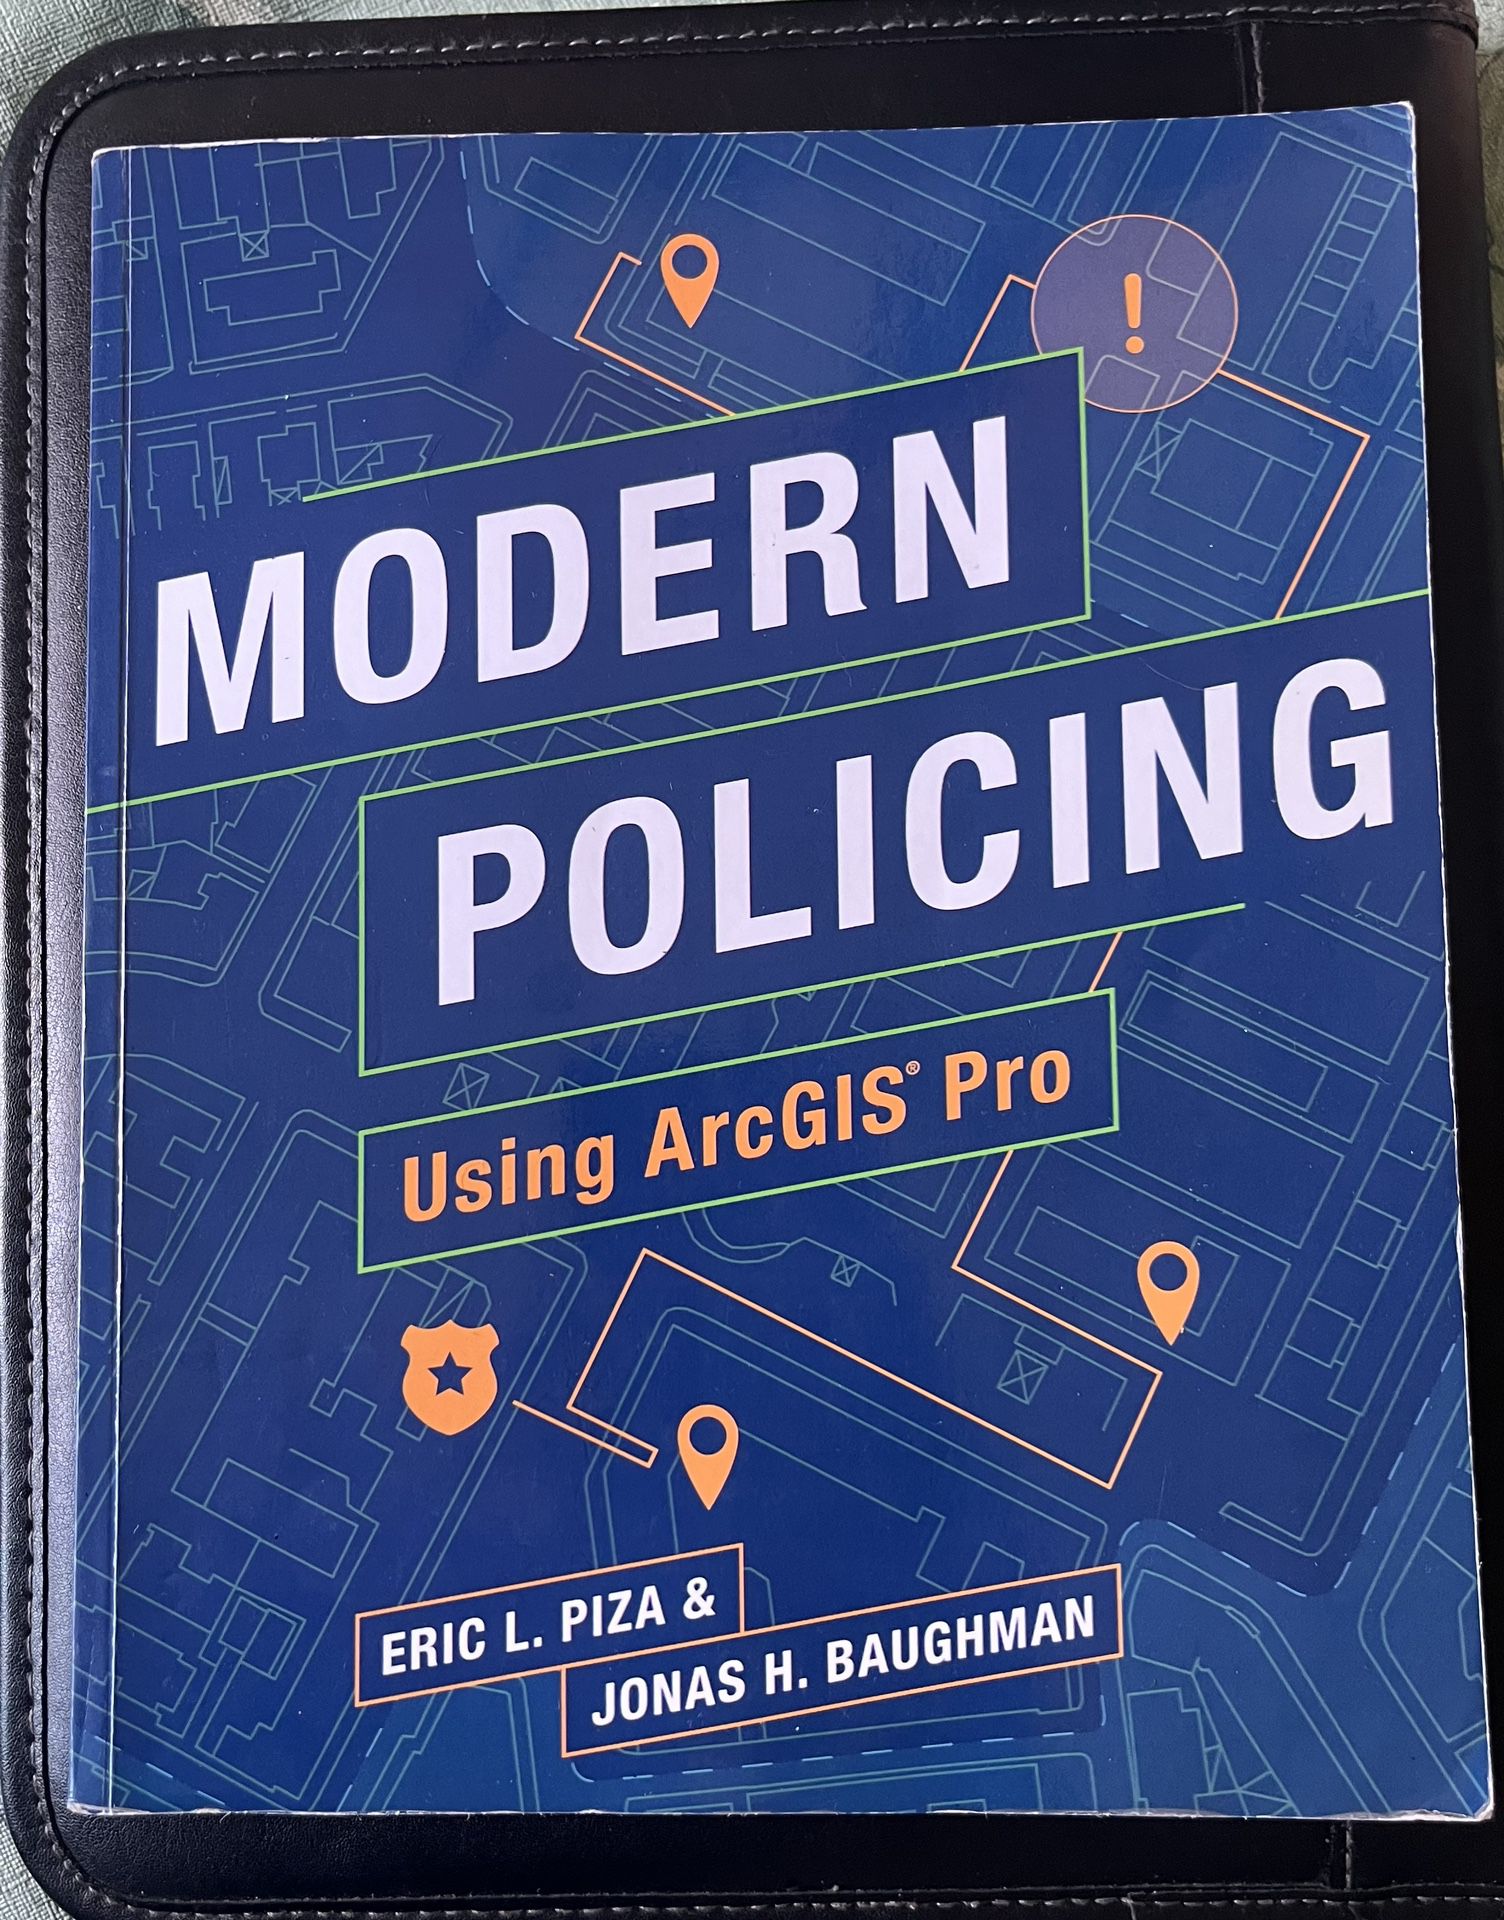 Modern Policing Using ArcGIS Pro by Jonas H. Baughman and Eric L. Piza